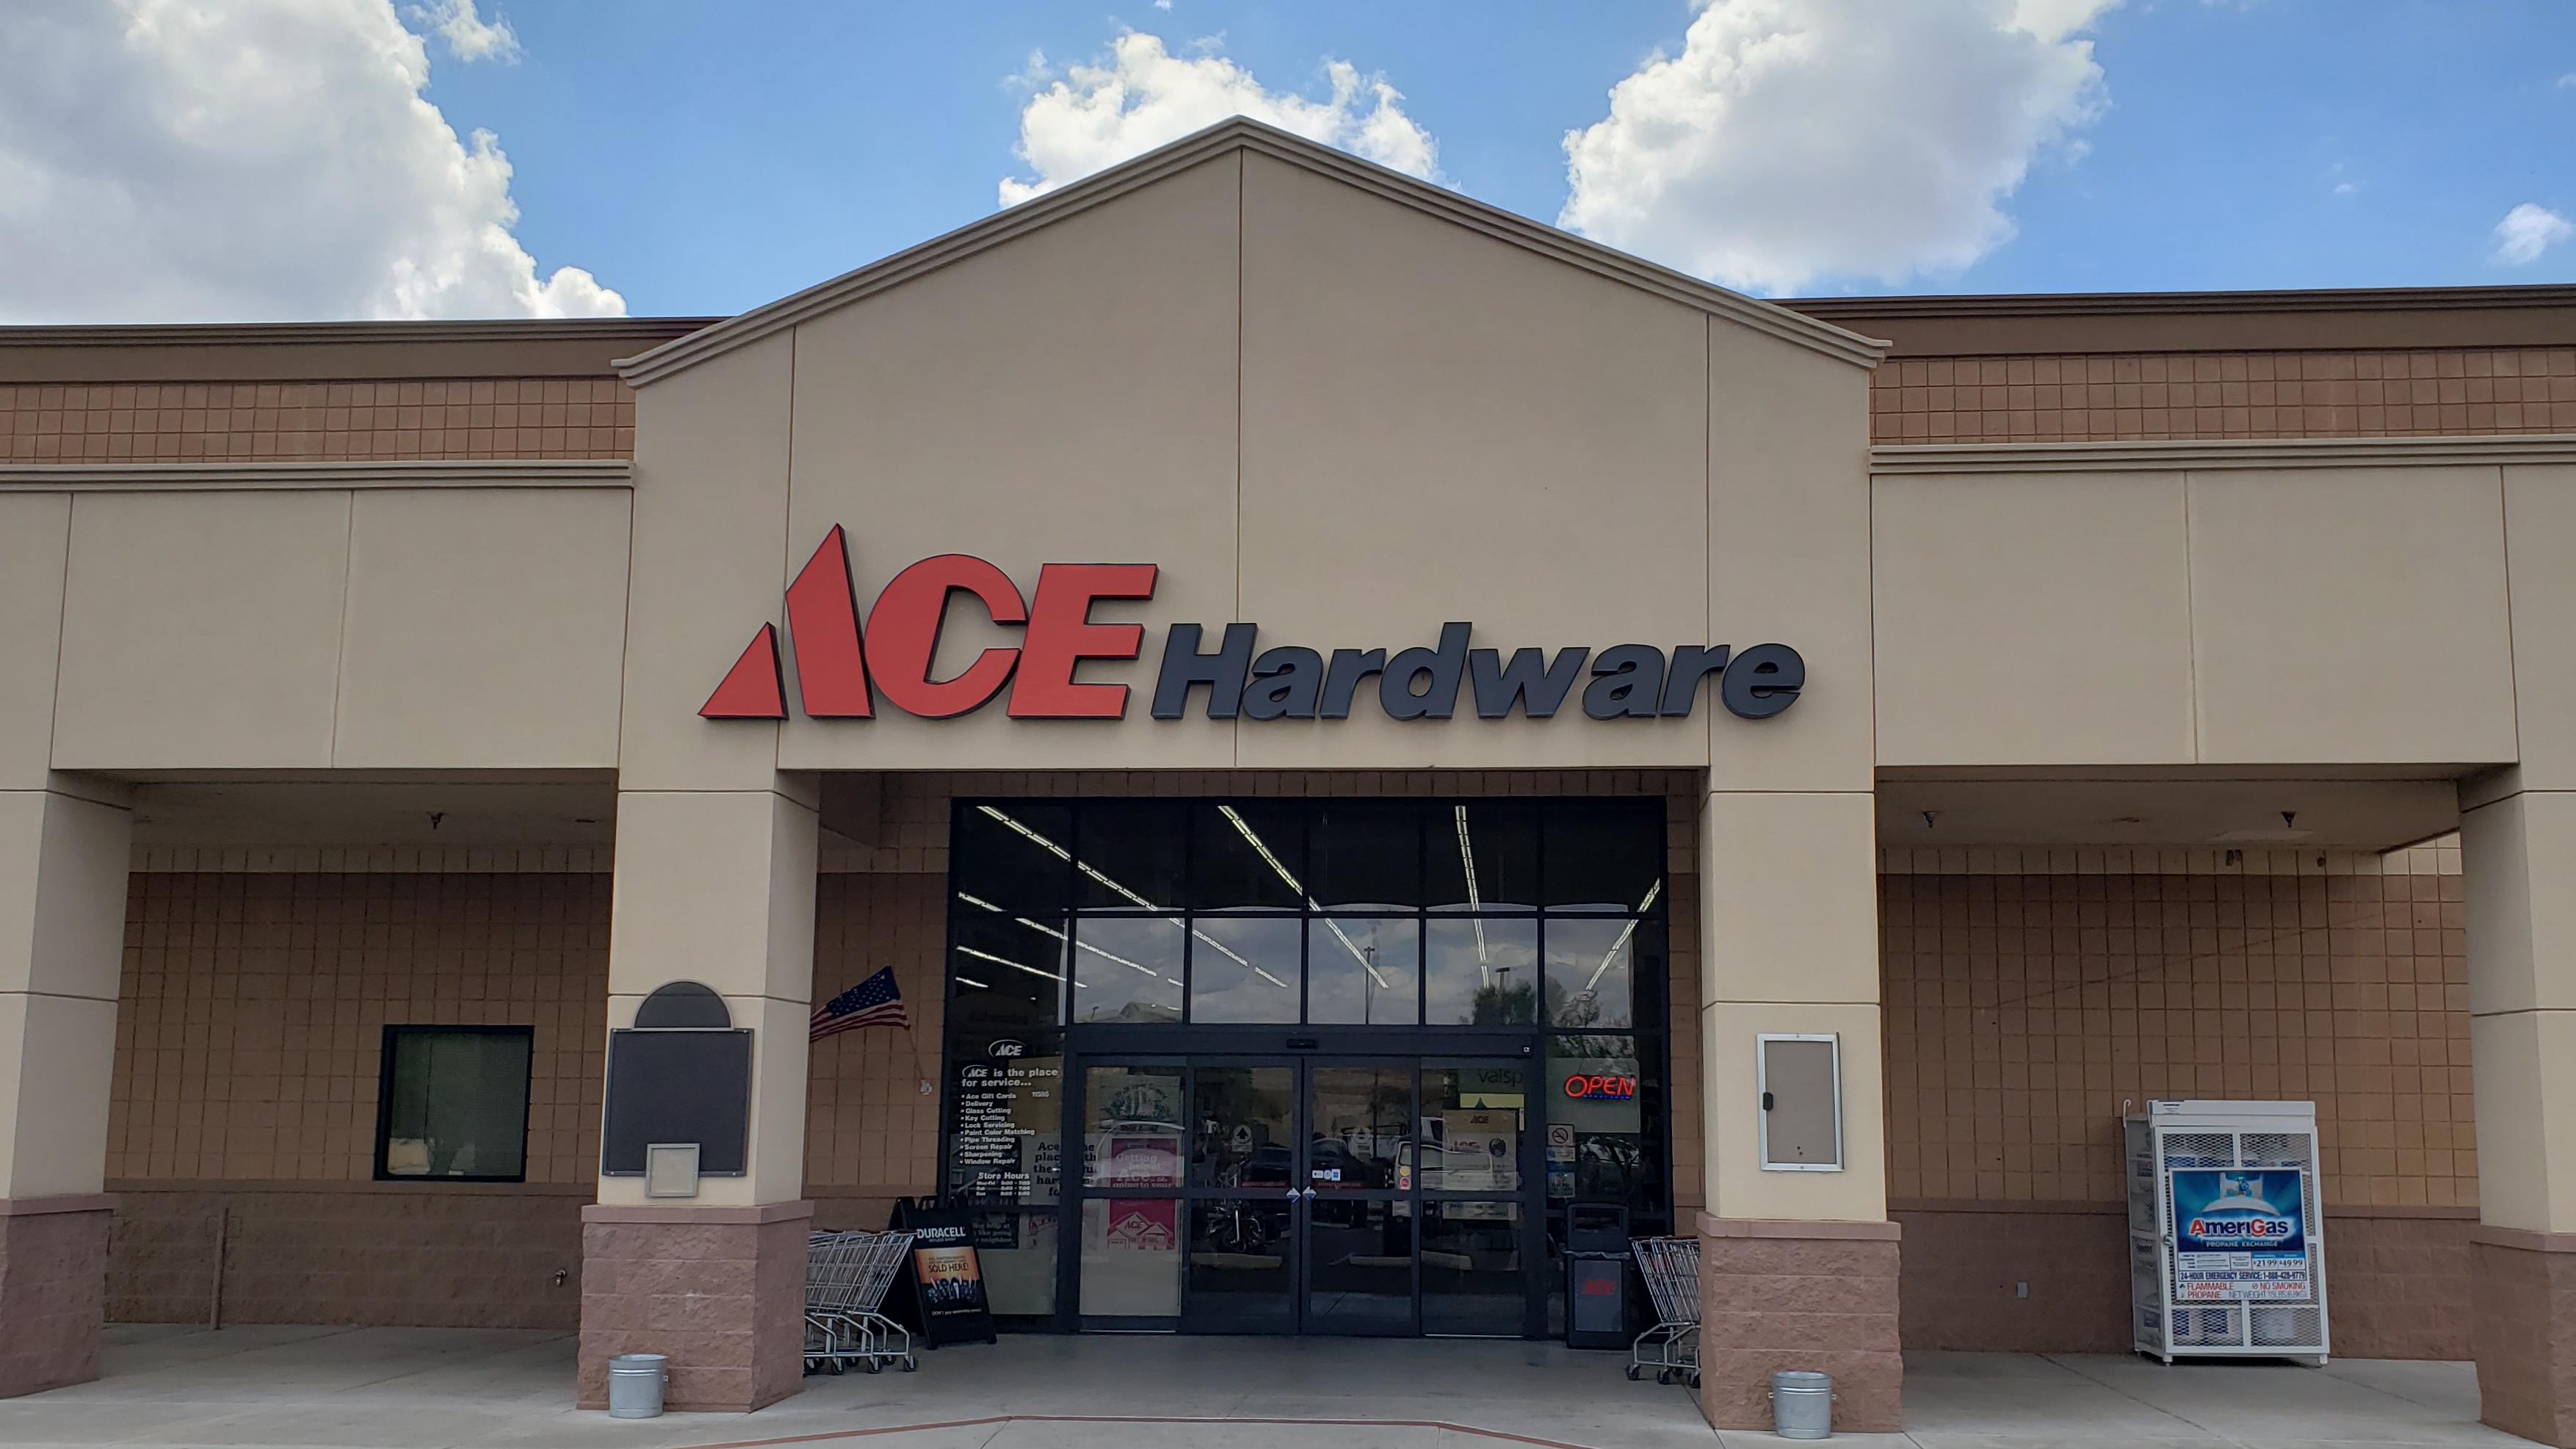 Continental Ranch Ace/Hardware Stores                                                                                                                                                                                         